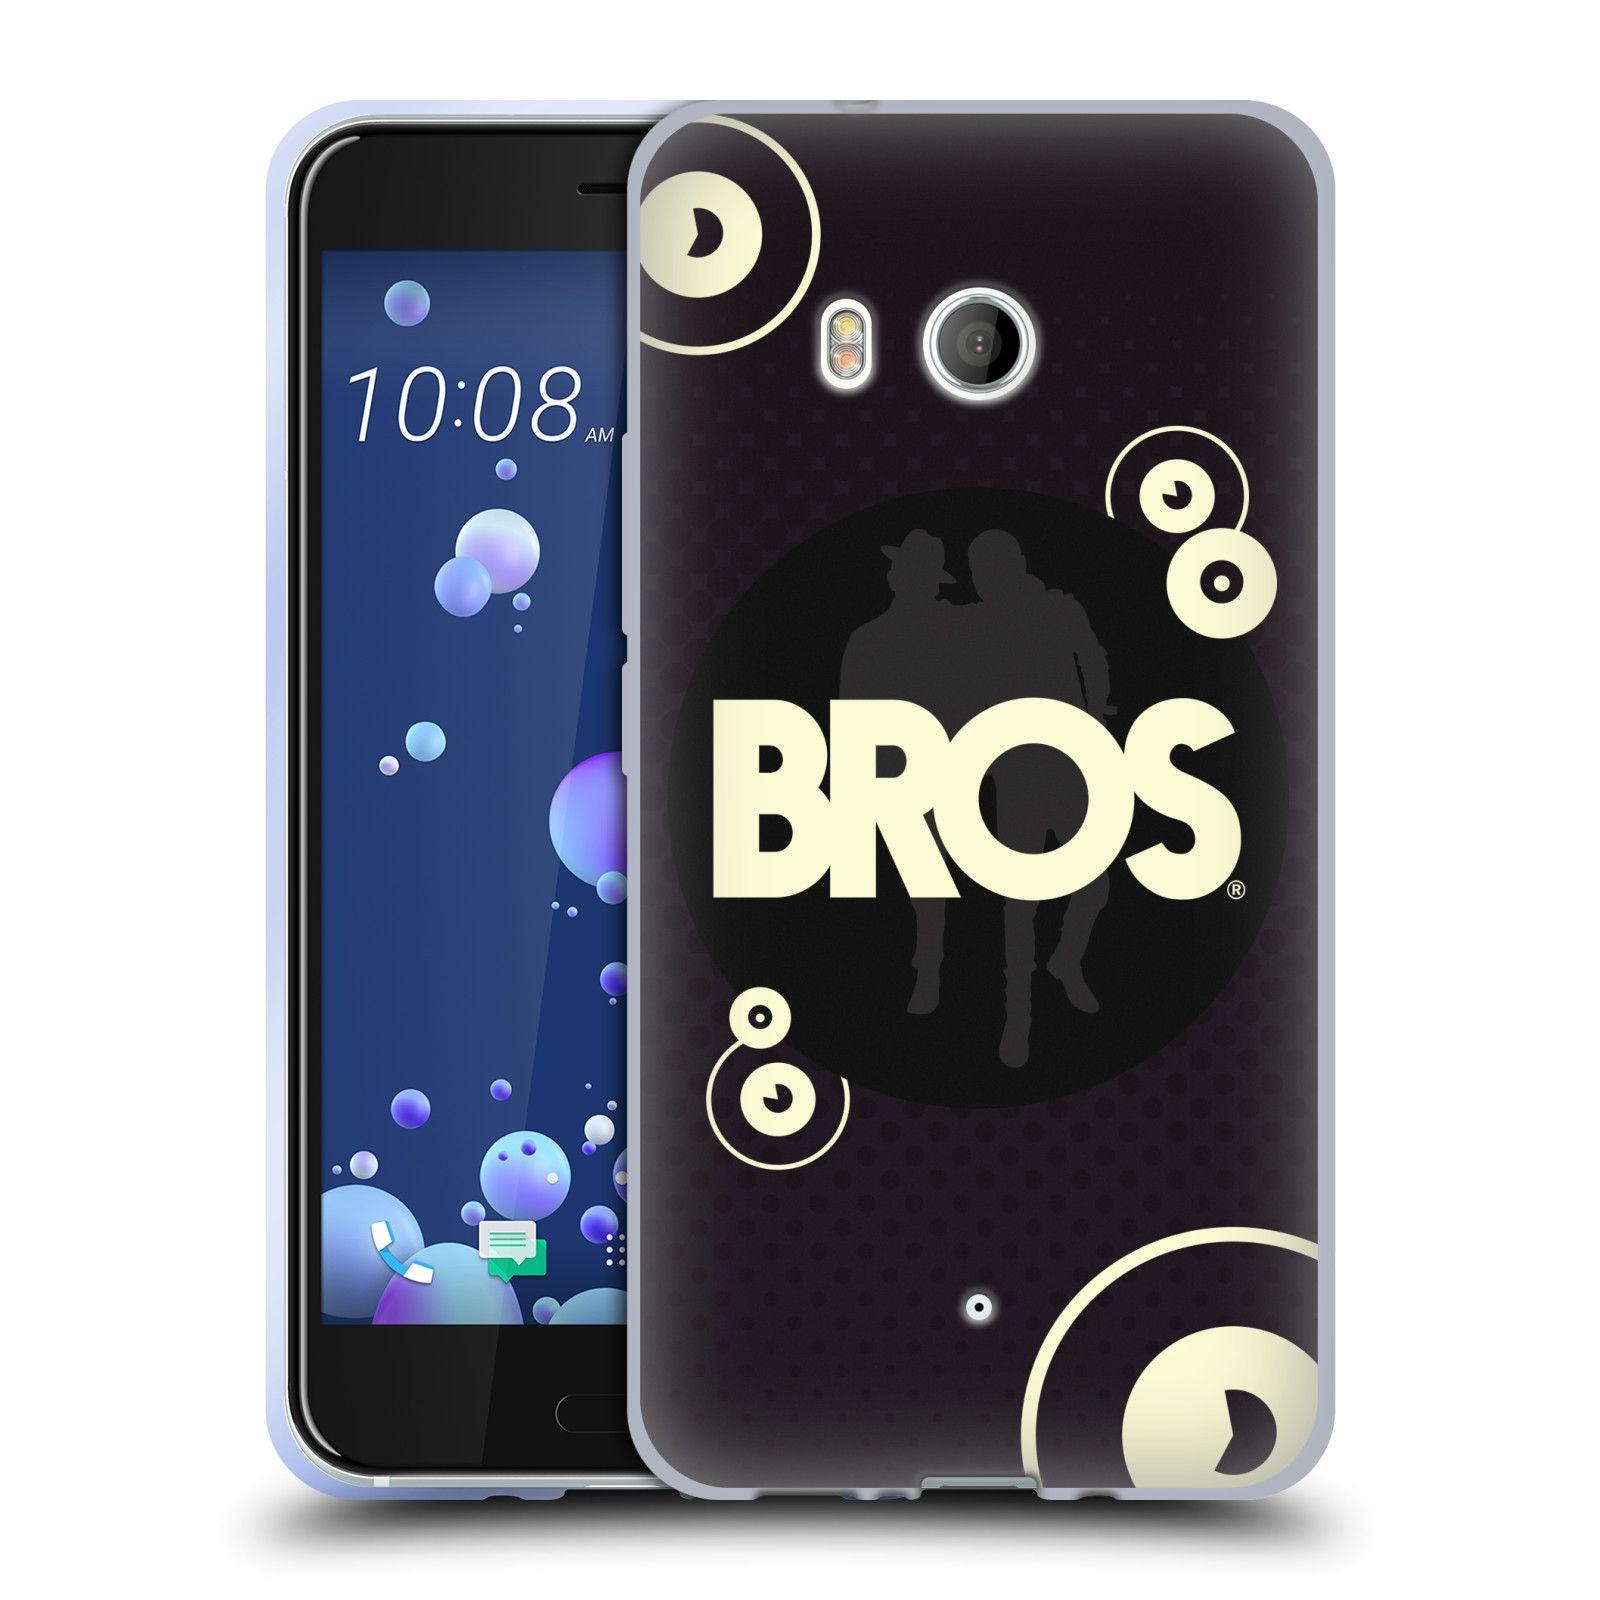 A9 Logo - Official Bros Logo Art Soft GEL Case for HTC PHONES 1 Text HTC One ...